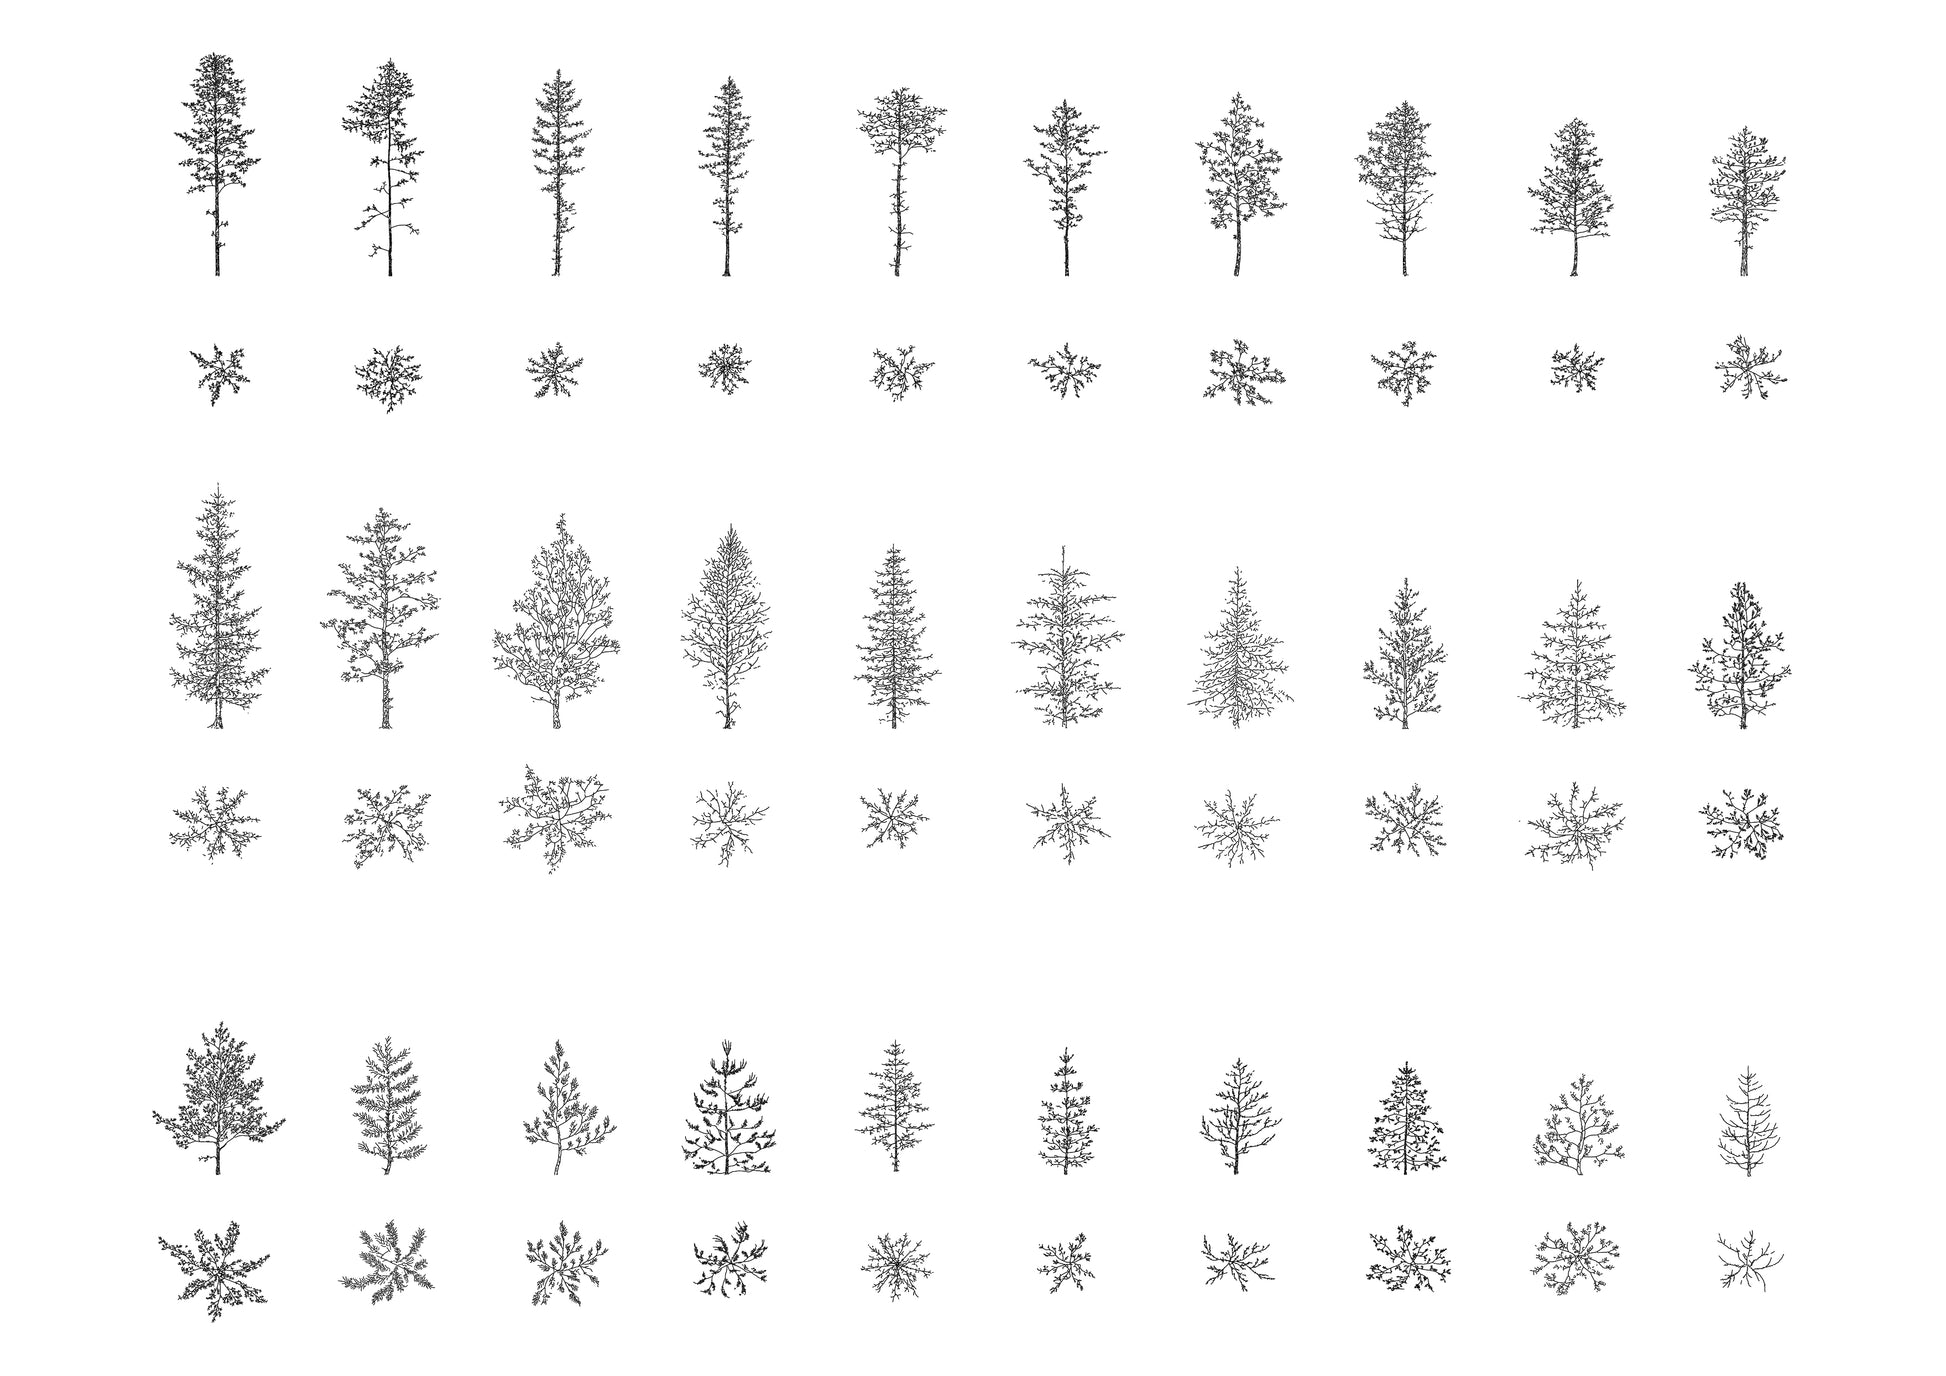 Project #2: Tree Drawing